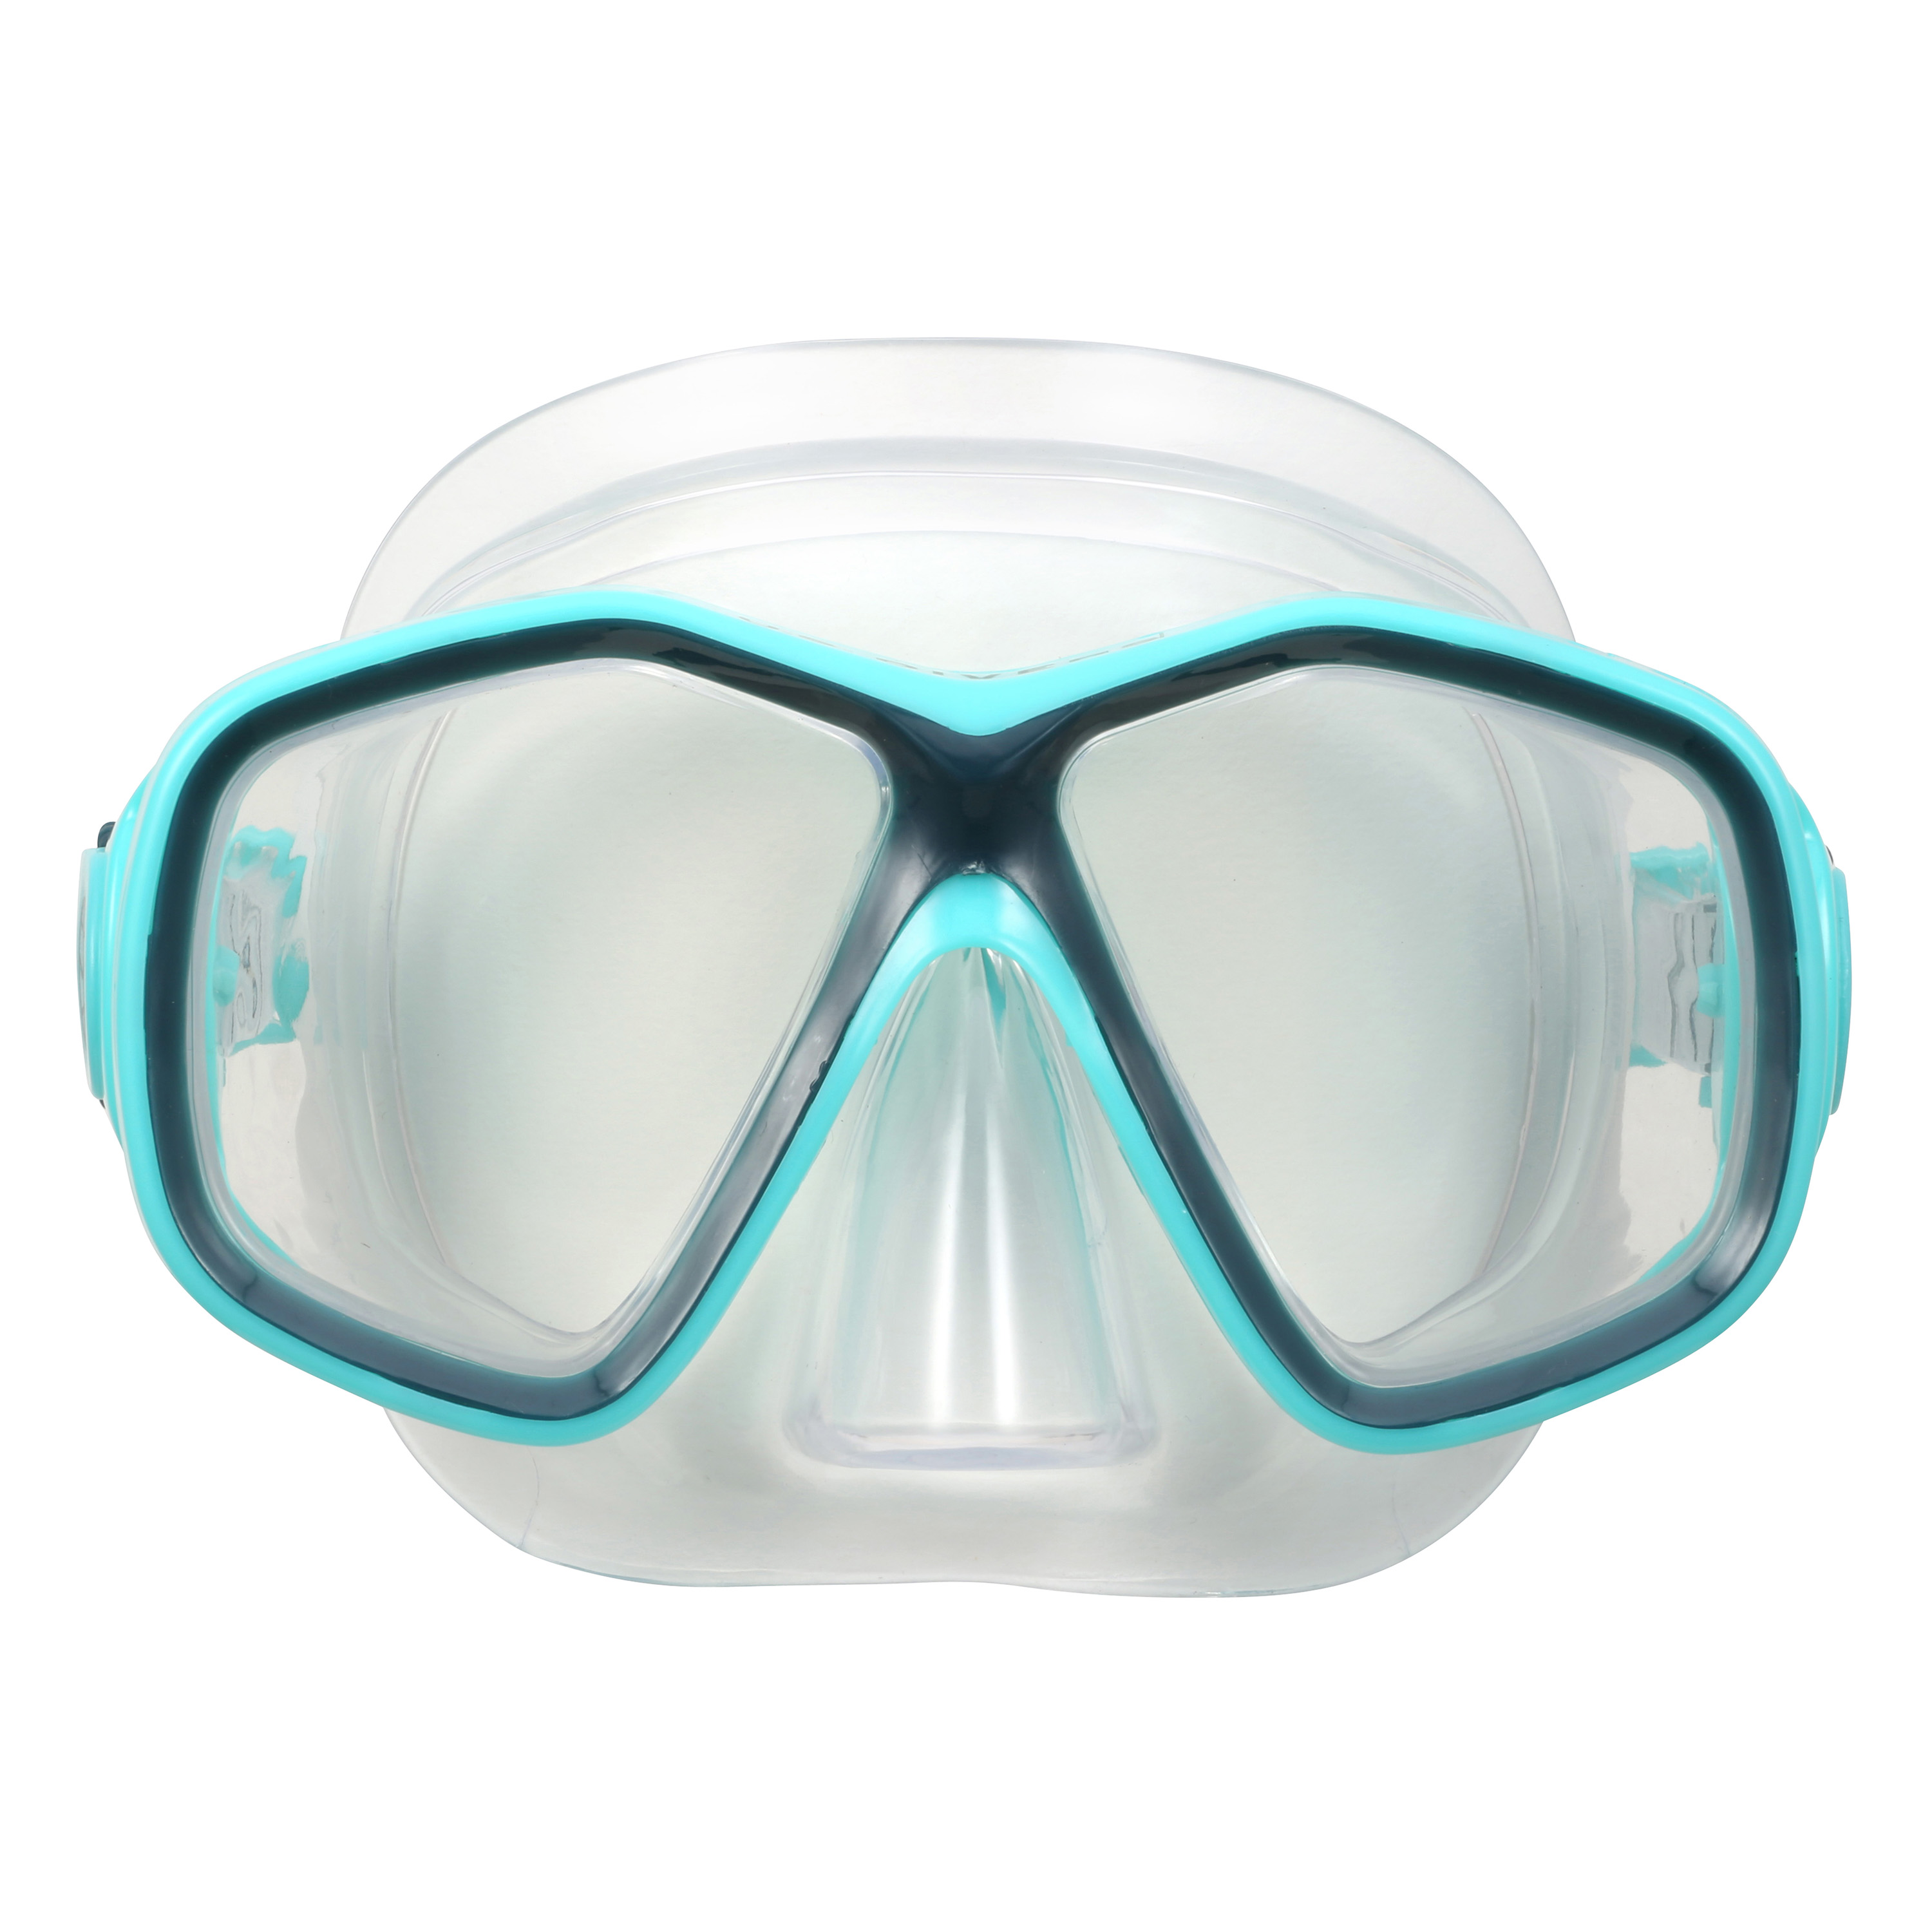 U.S. Divers Playa Adult Snorkeling Combo - Mask and Snorkel Included (Teal & Blue) - image 3 of 10